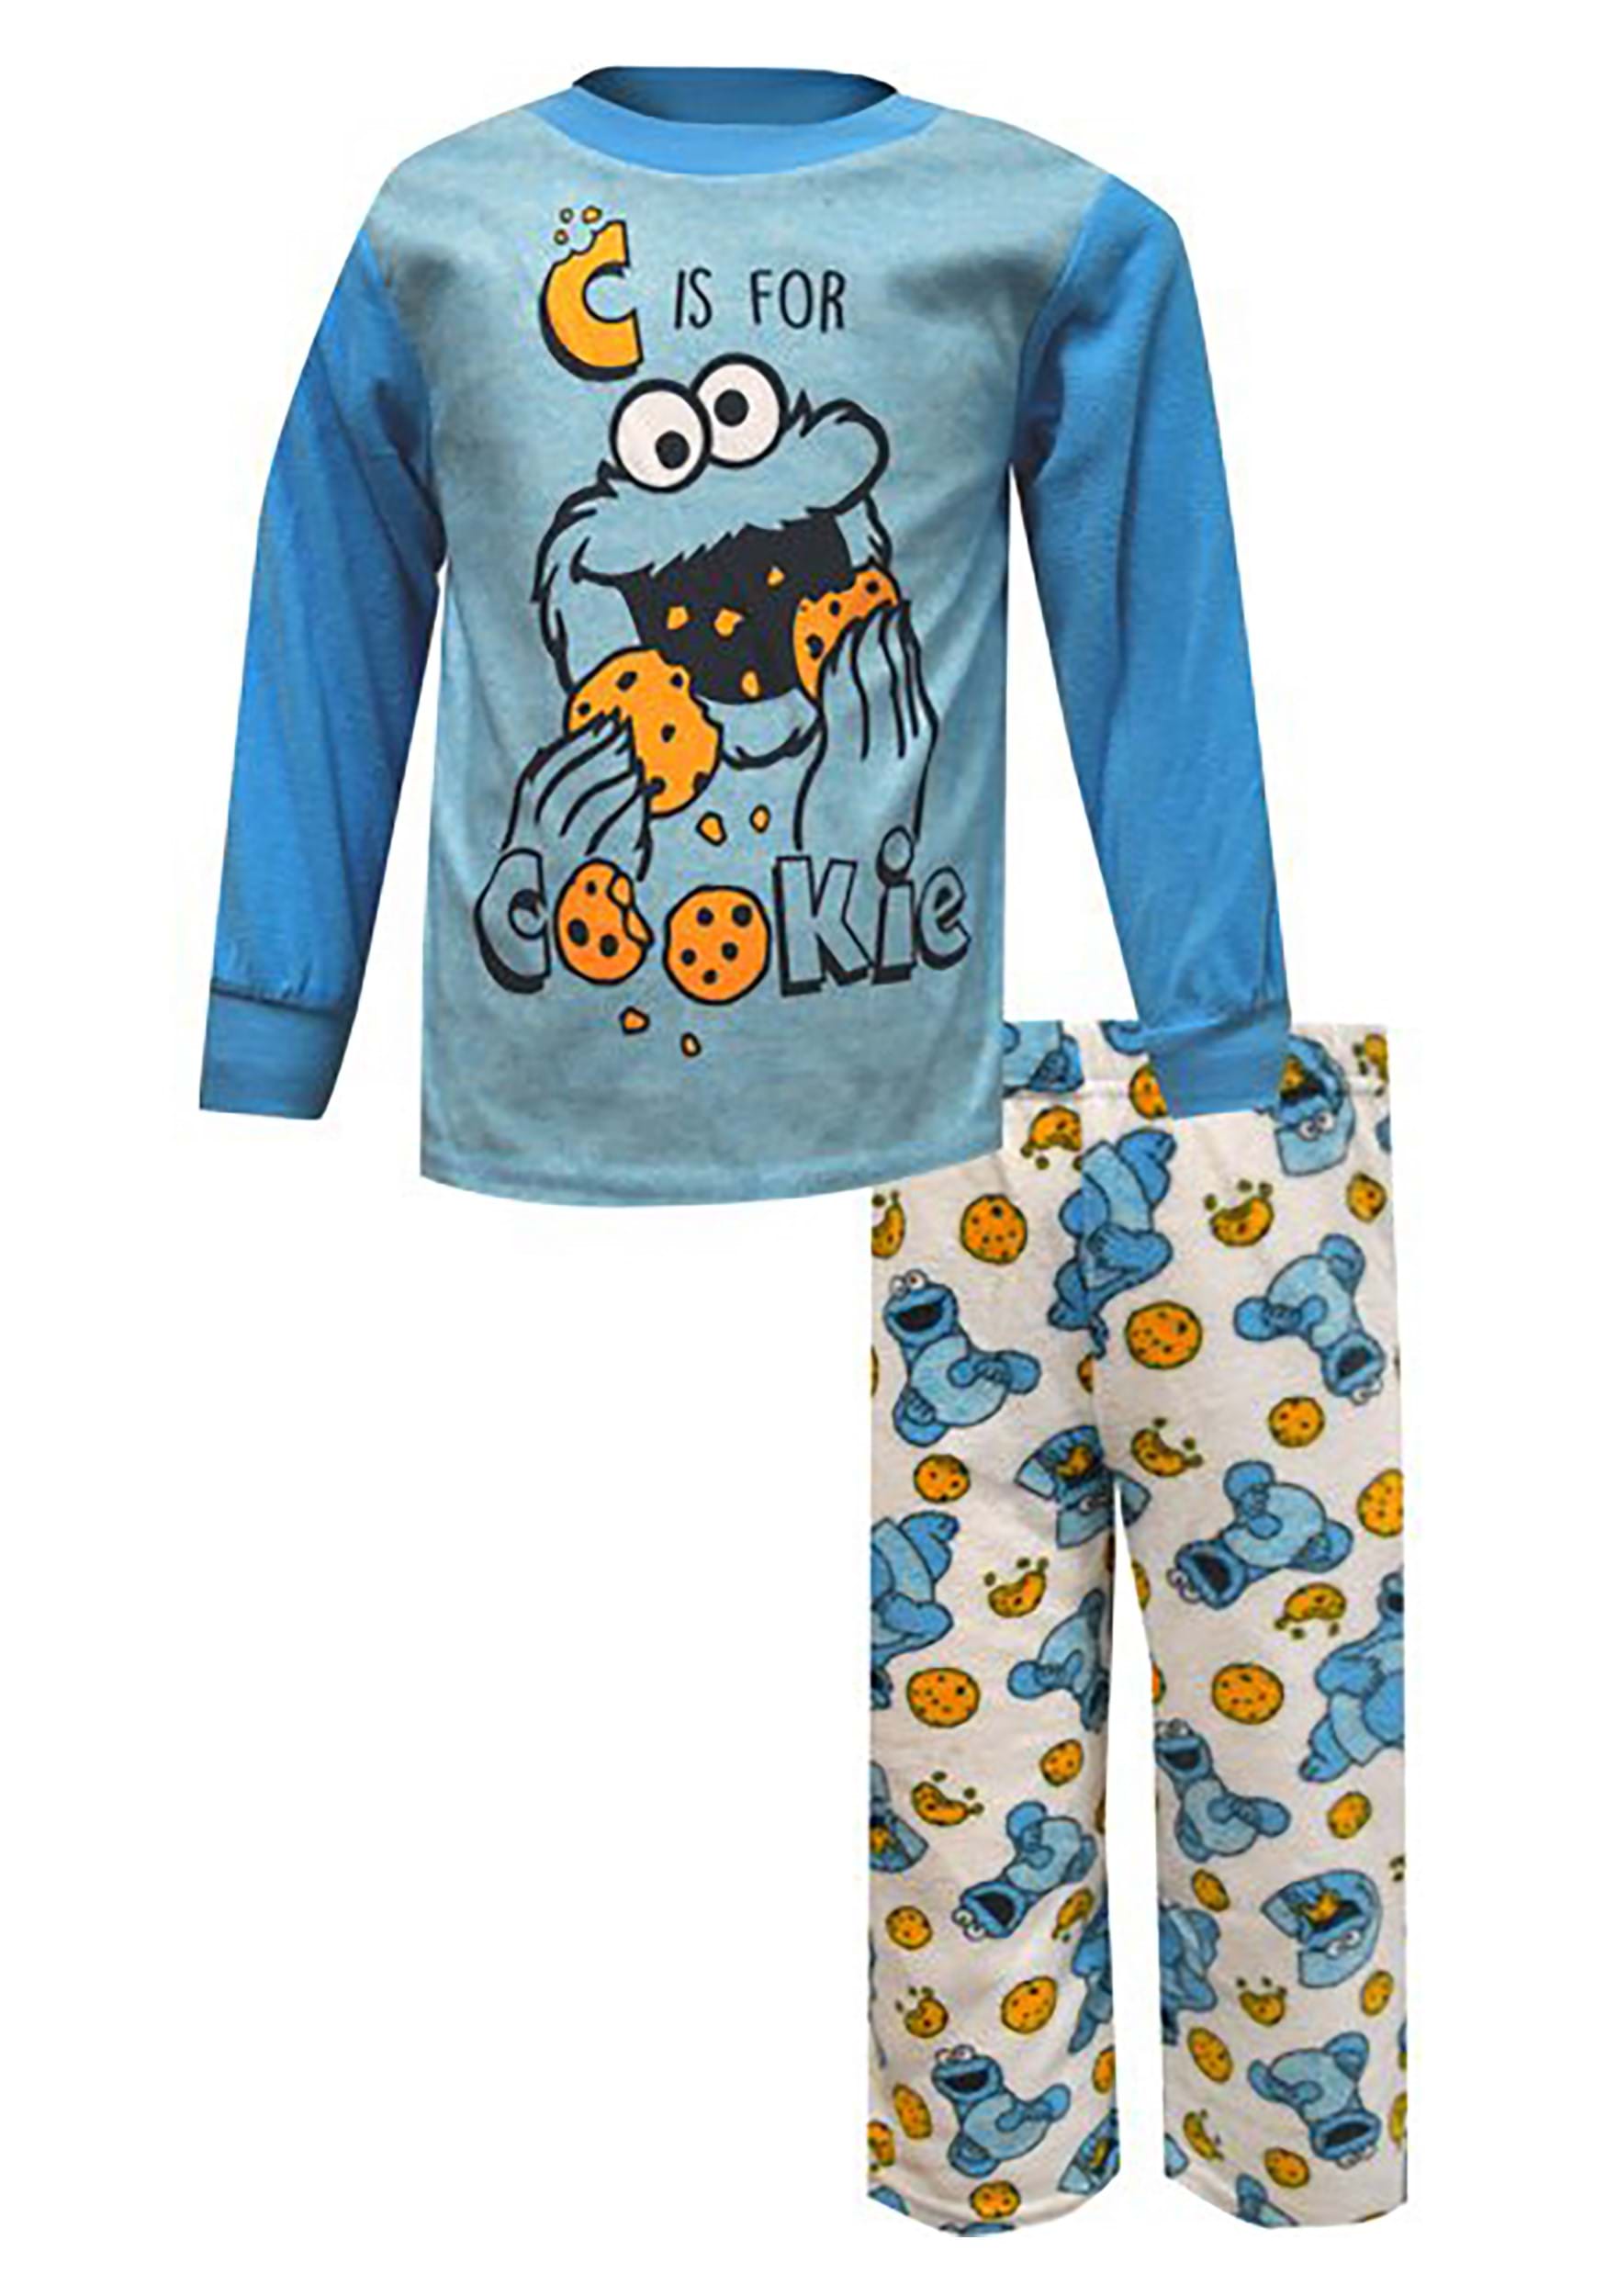 Boys C is for Cookie Monster Toddler Pajama Set